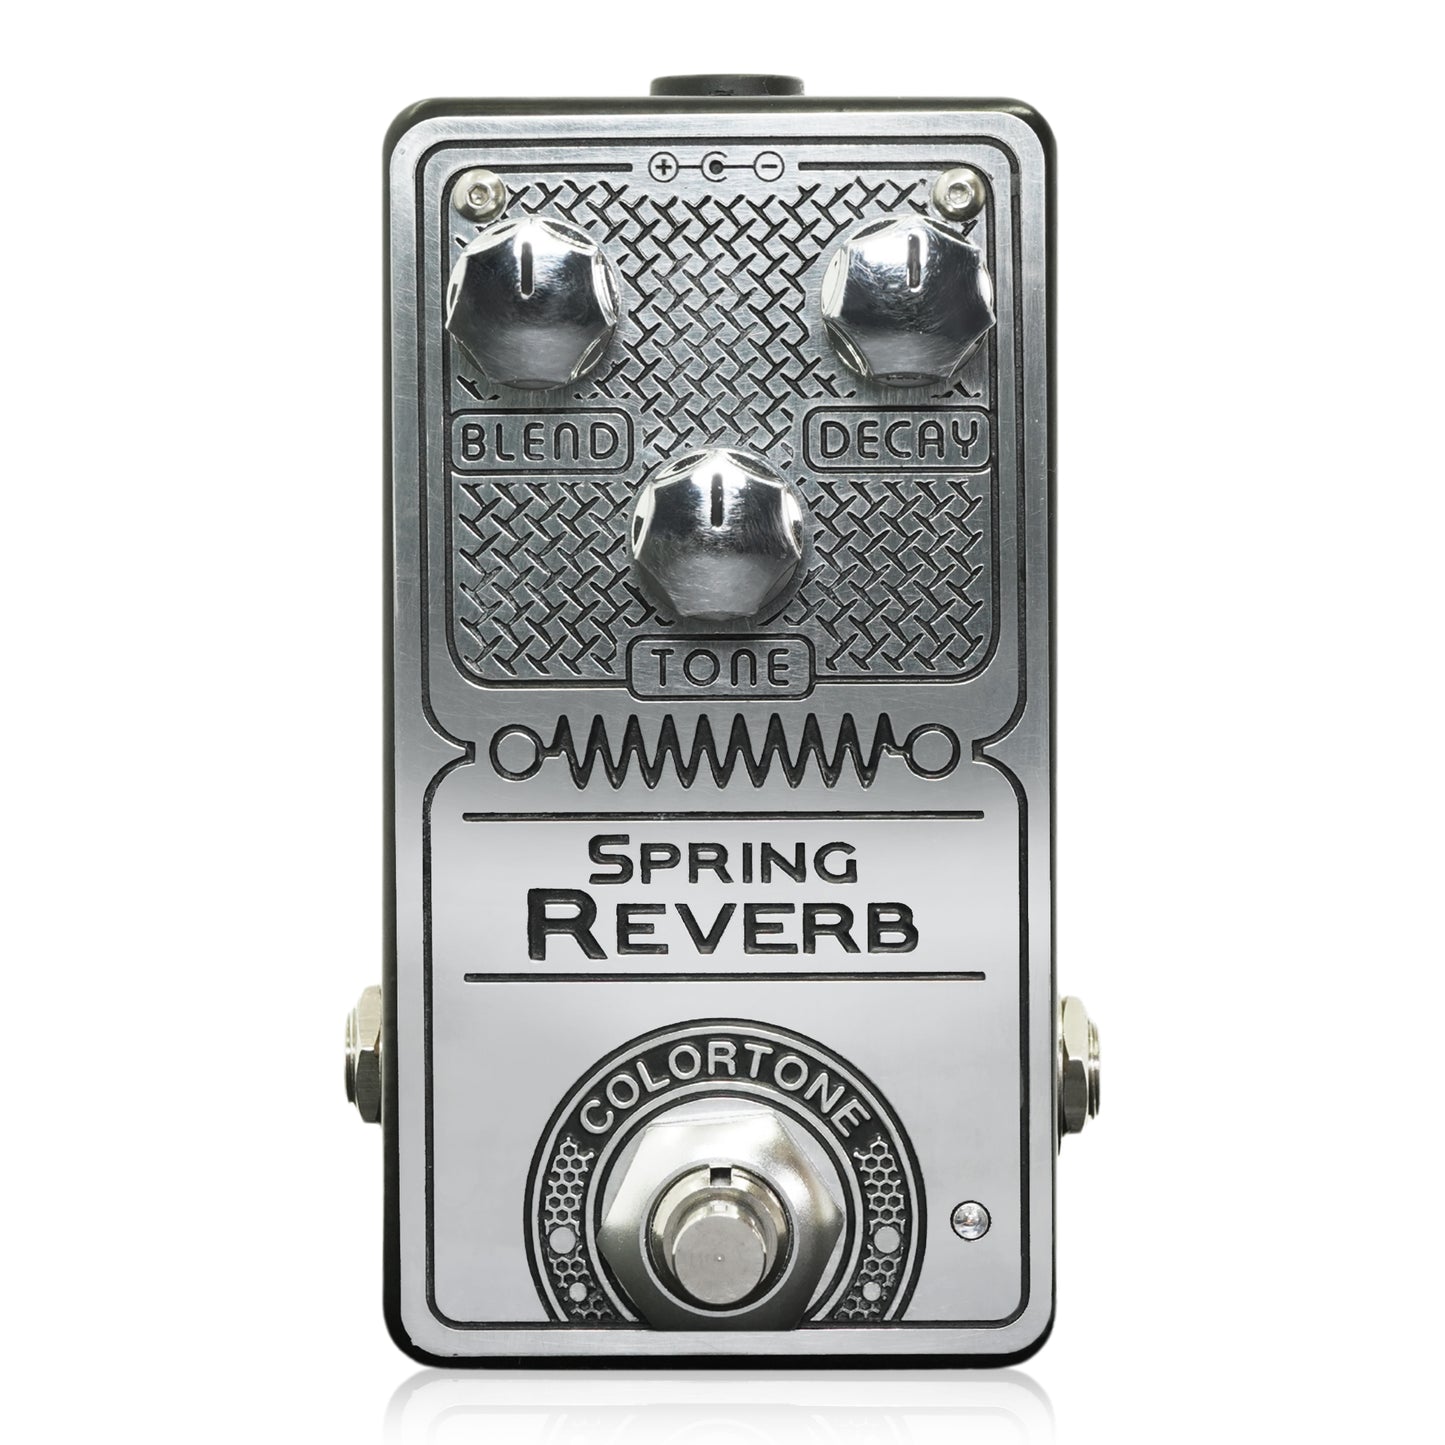 Colortone Pedals　Spring Reverb　/ リバーブ ギター エフェクター